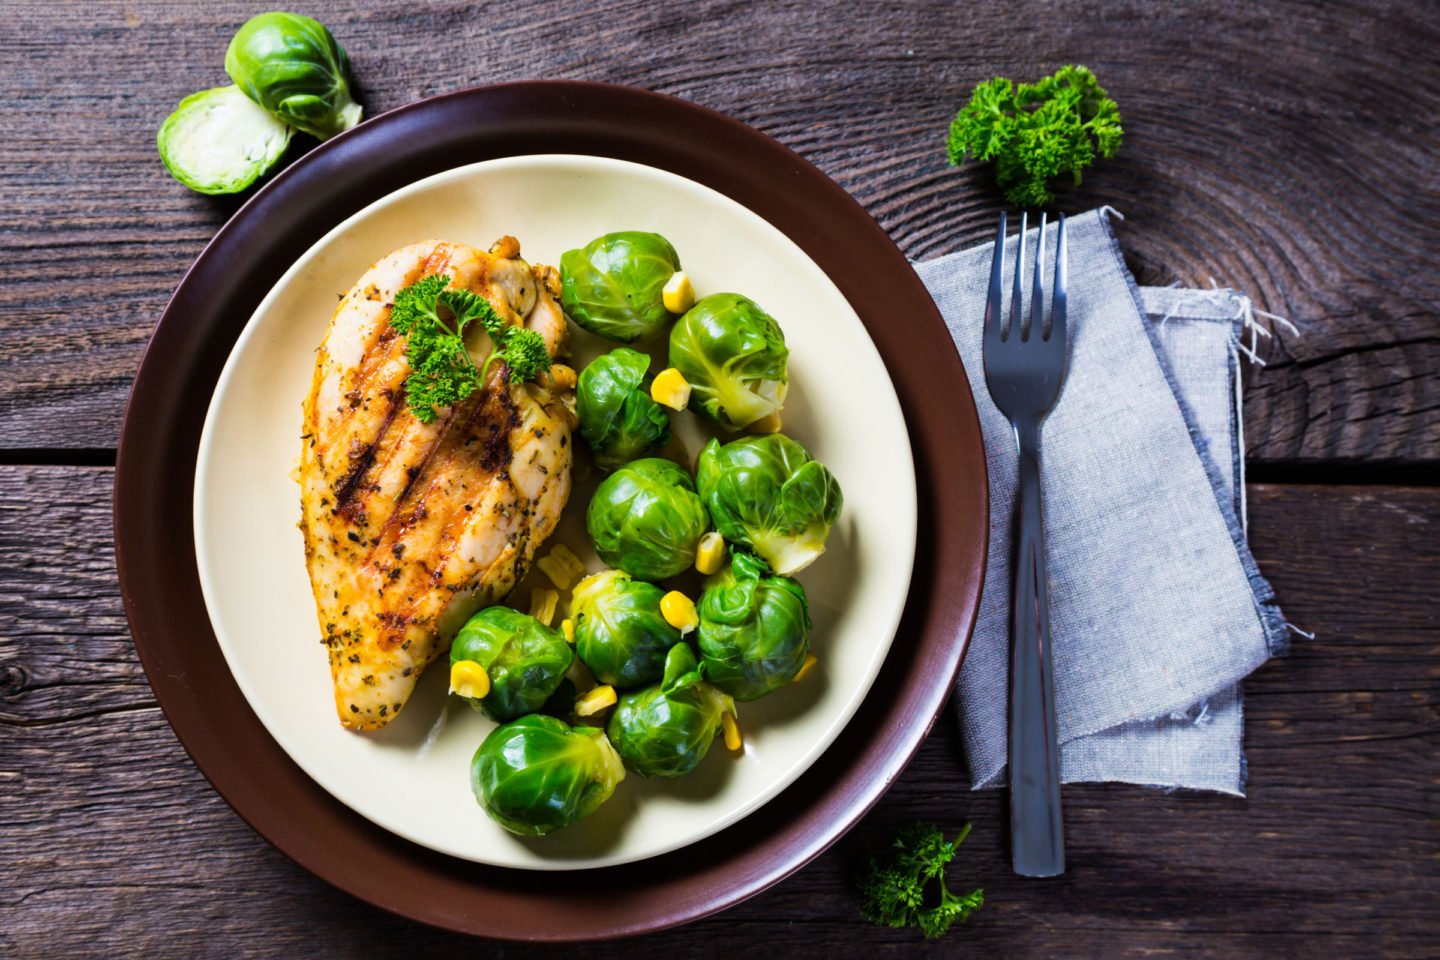 grilled chicken served with brussels sprouts 